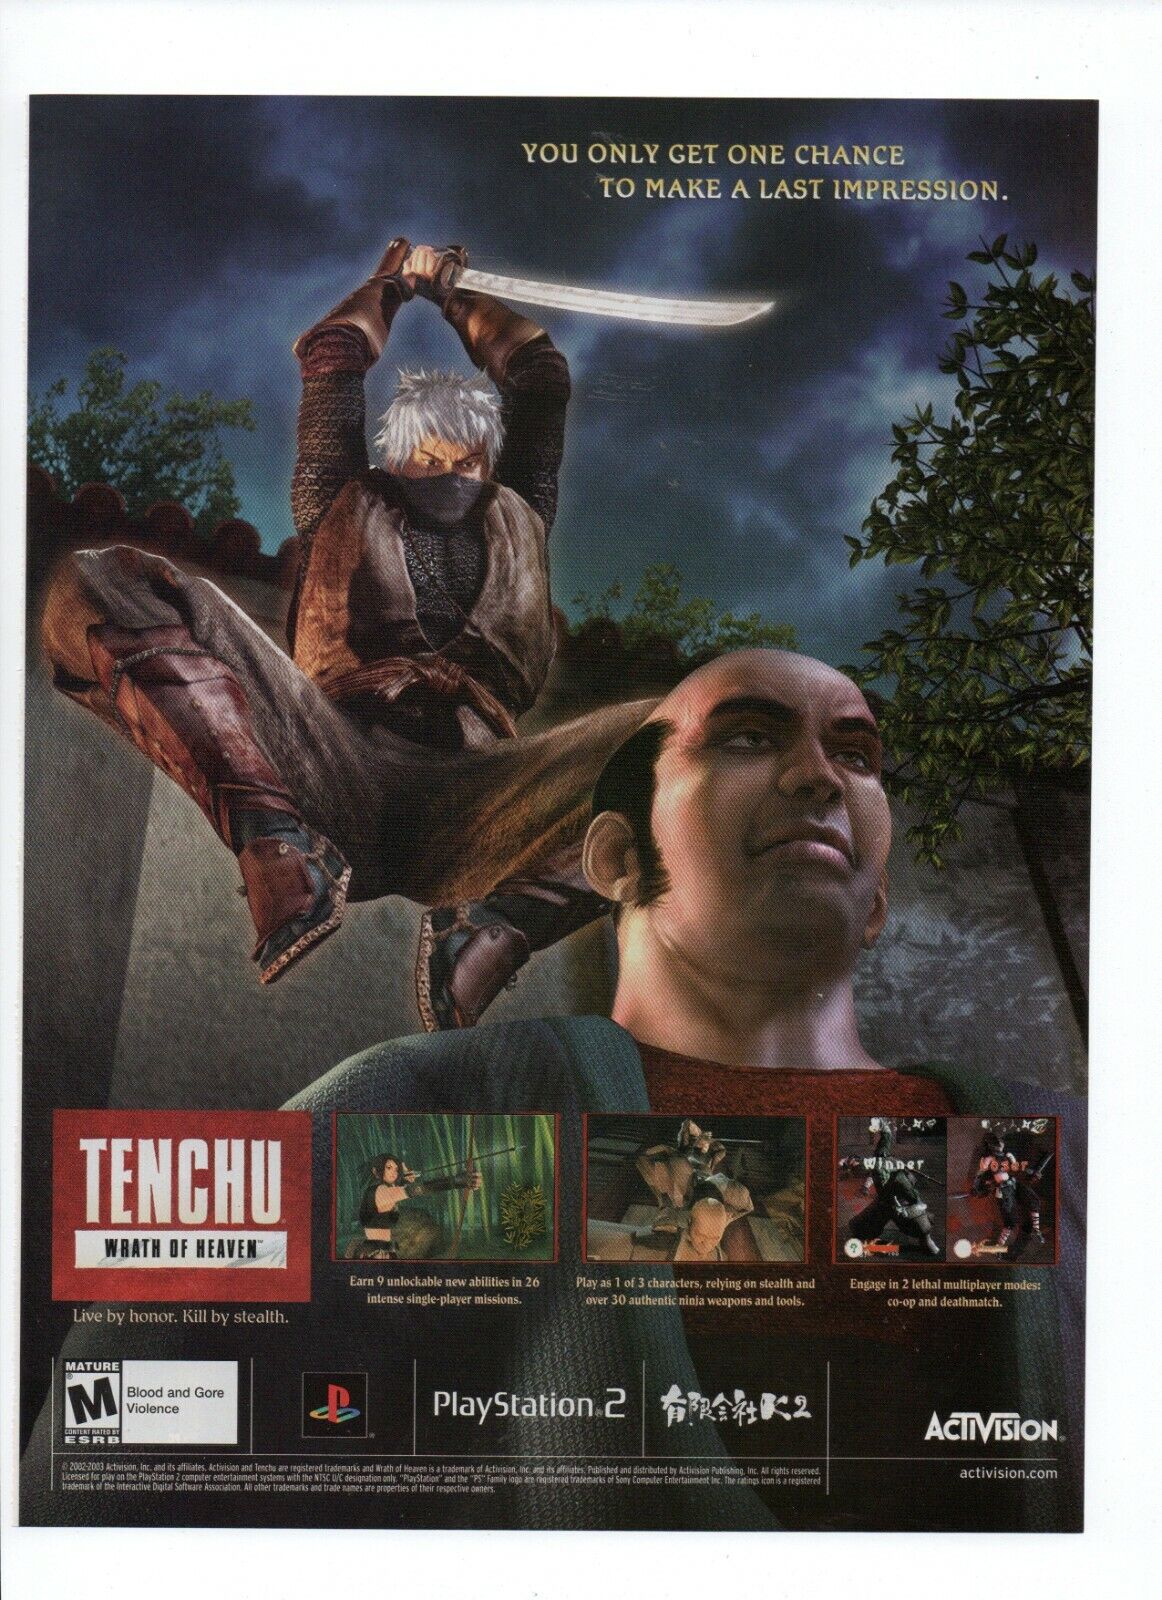 Tenchu Wrath Of Heaven Live By Honor Kill By Stealth - 2003 PS2 Game Print Ad